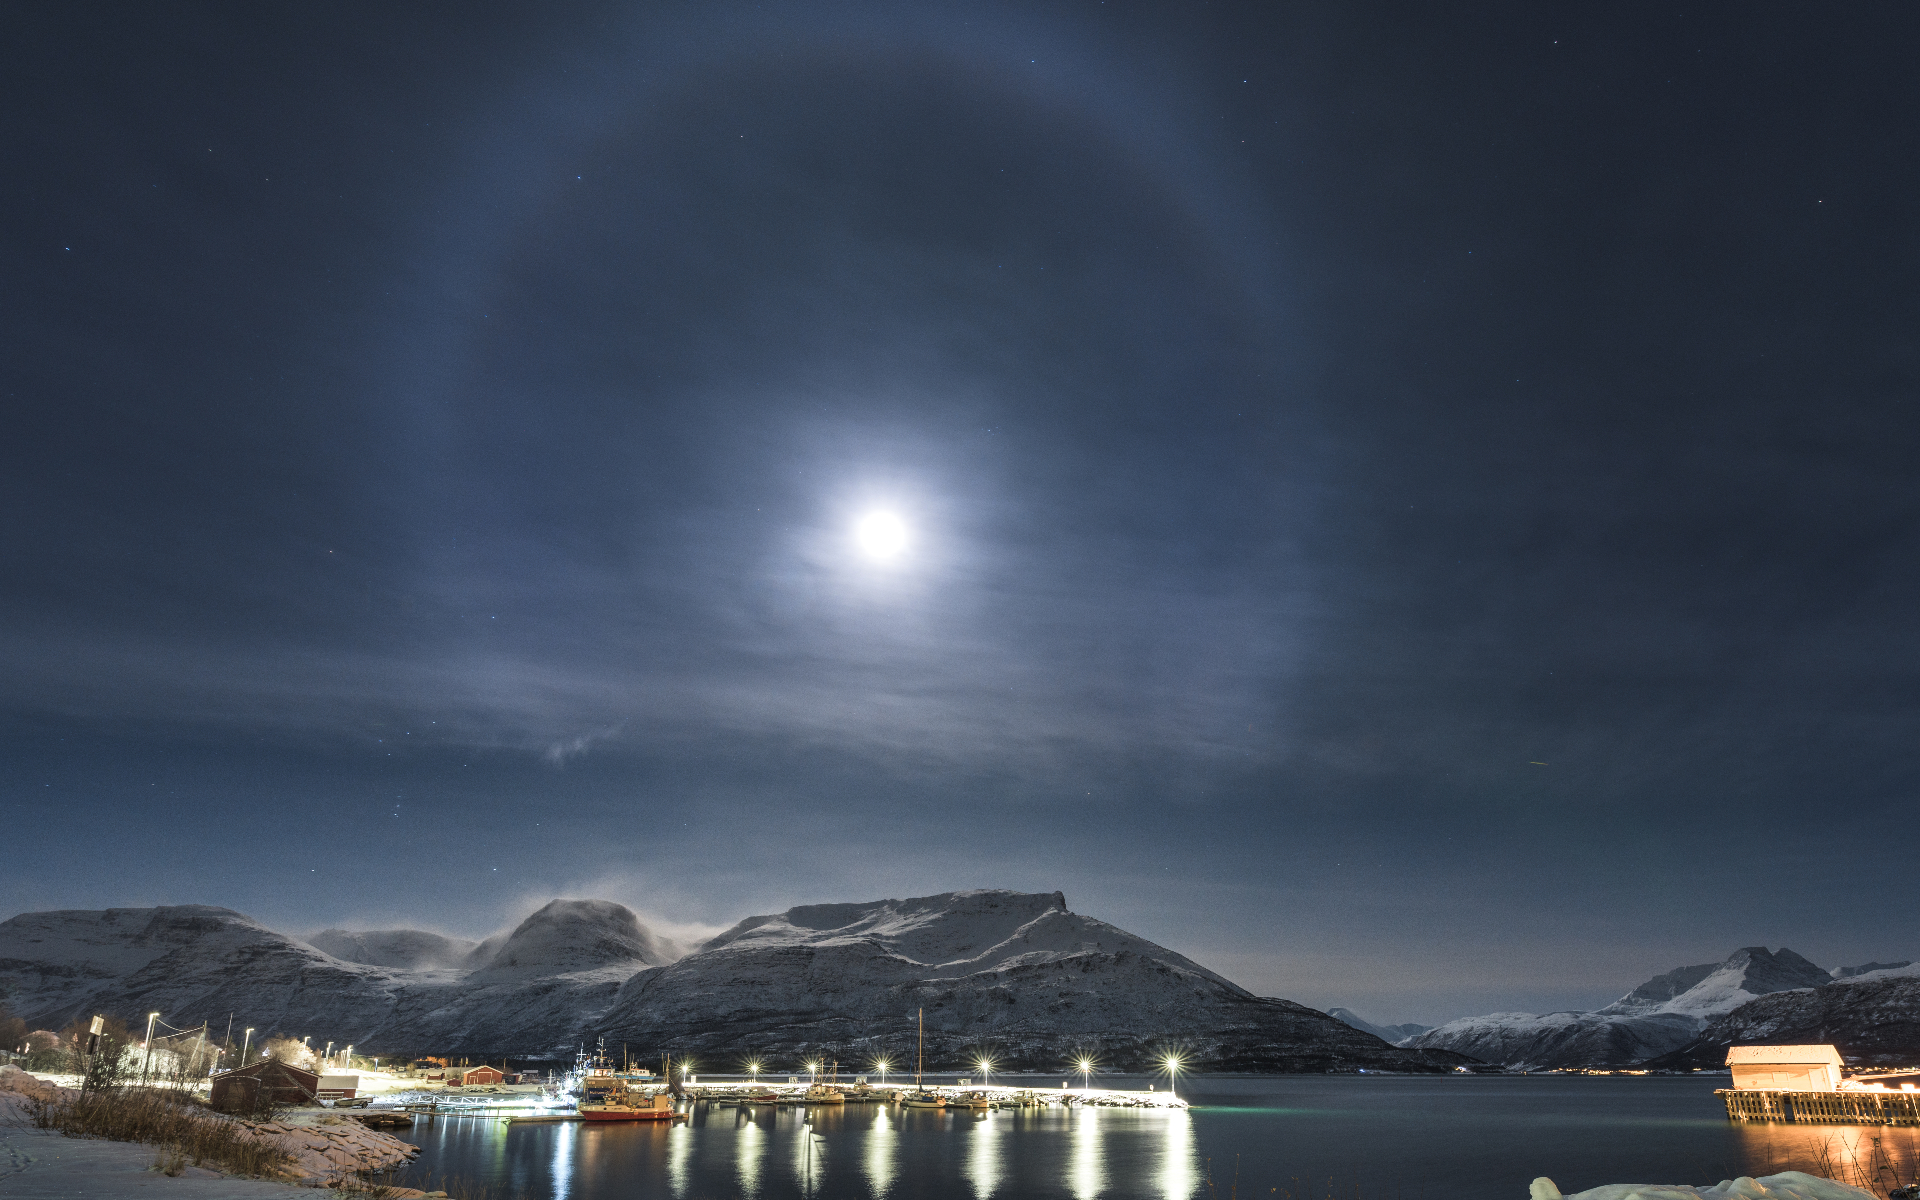 Halo around the moon which is located in the sky above snow-capped mountains and a large body of water below. Lights from a nearby town are reflected in the water.